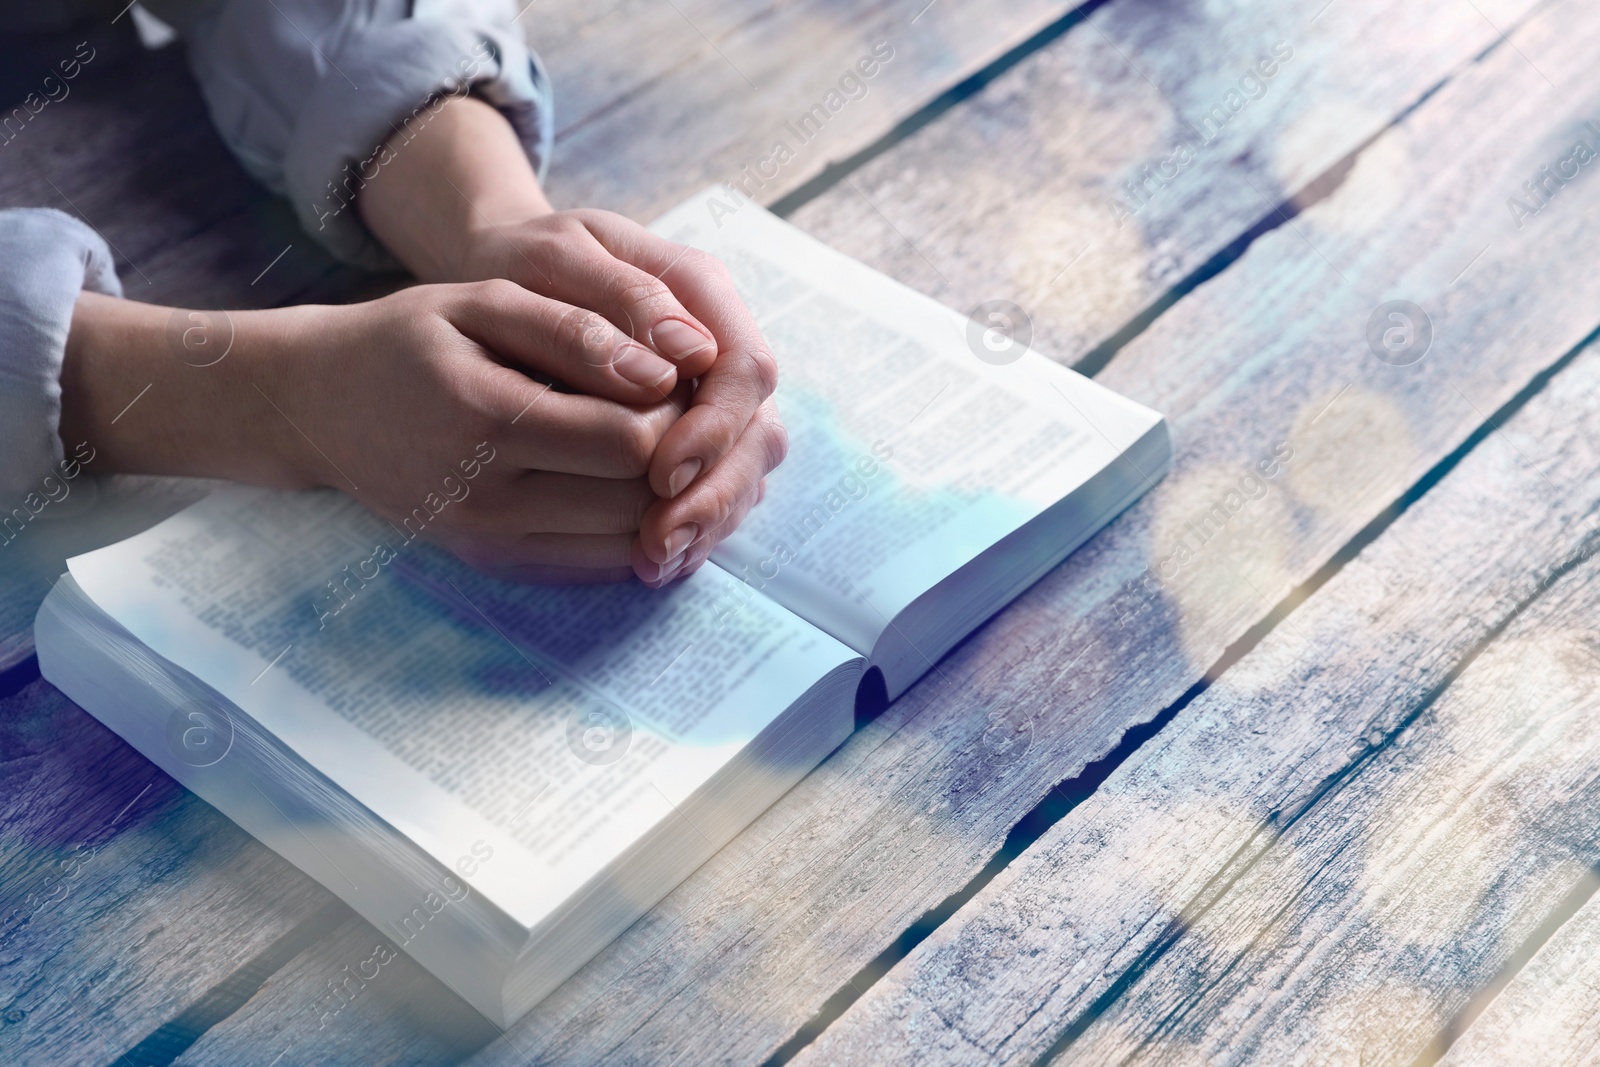 Image of Religion. Christian woman praying over Bible at table, closeup. Bokeh effect